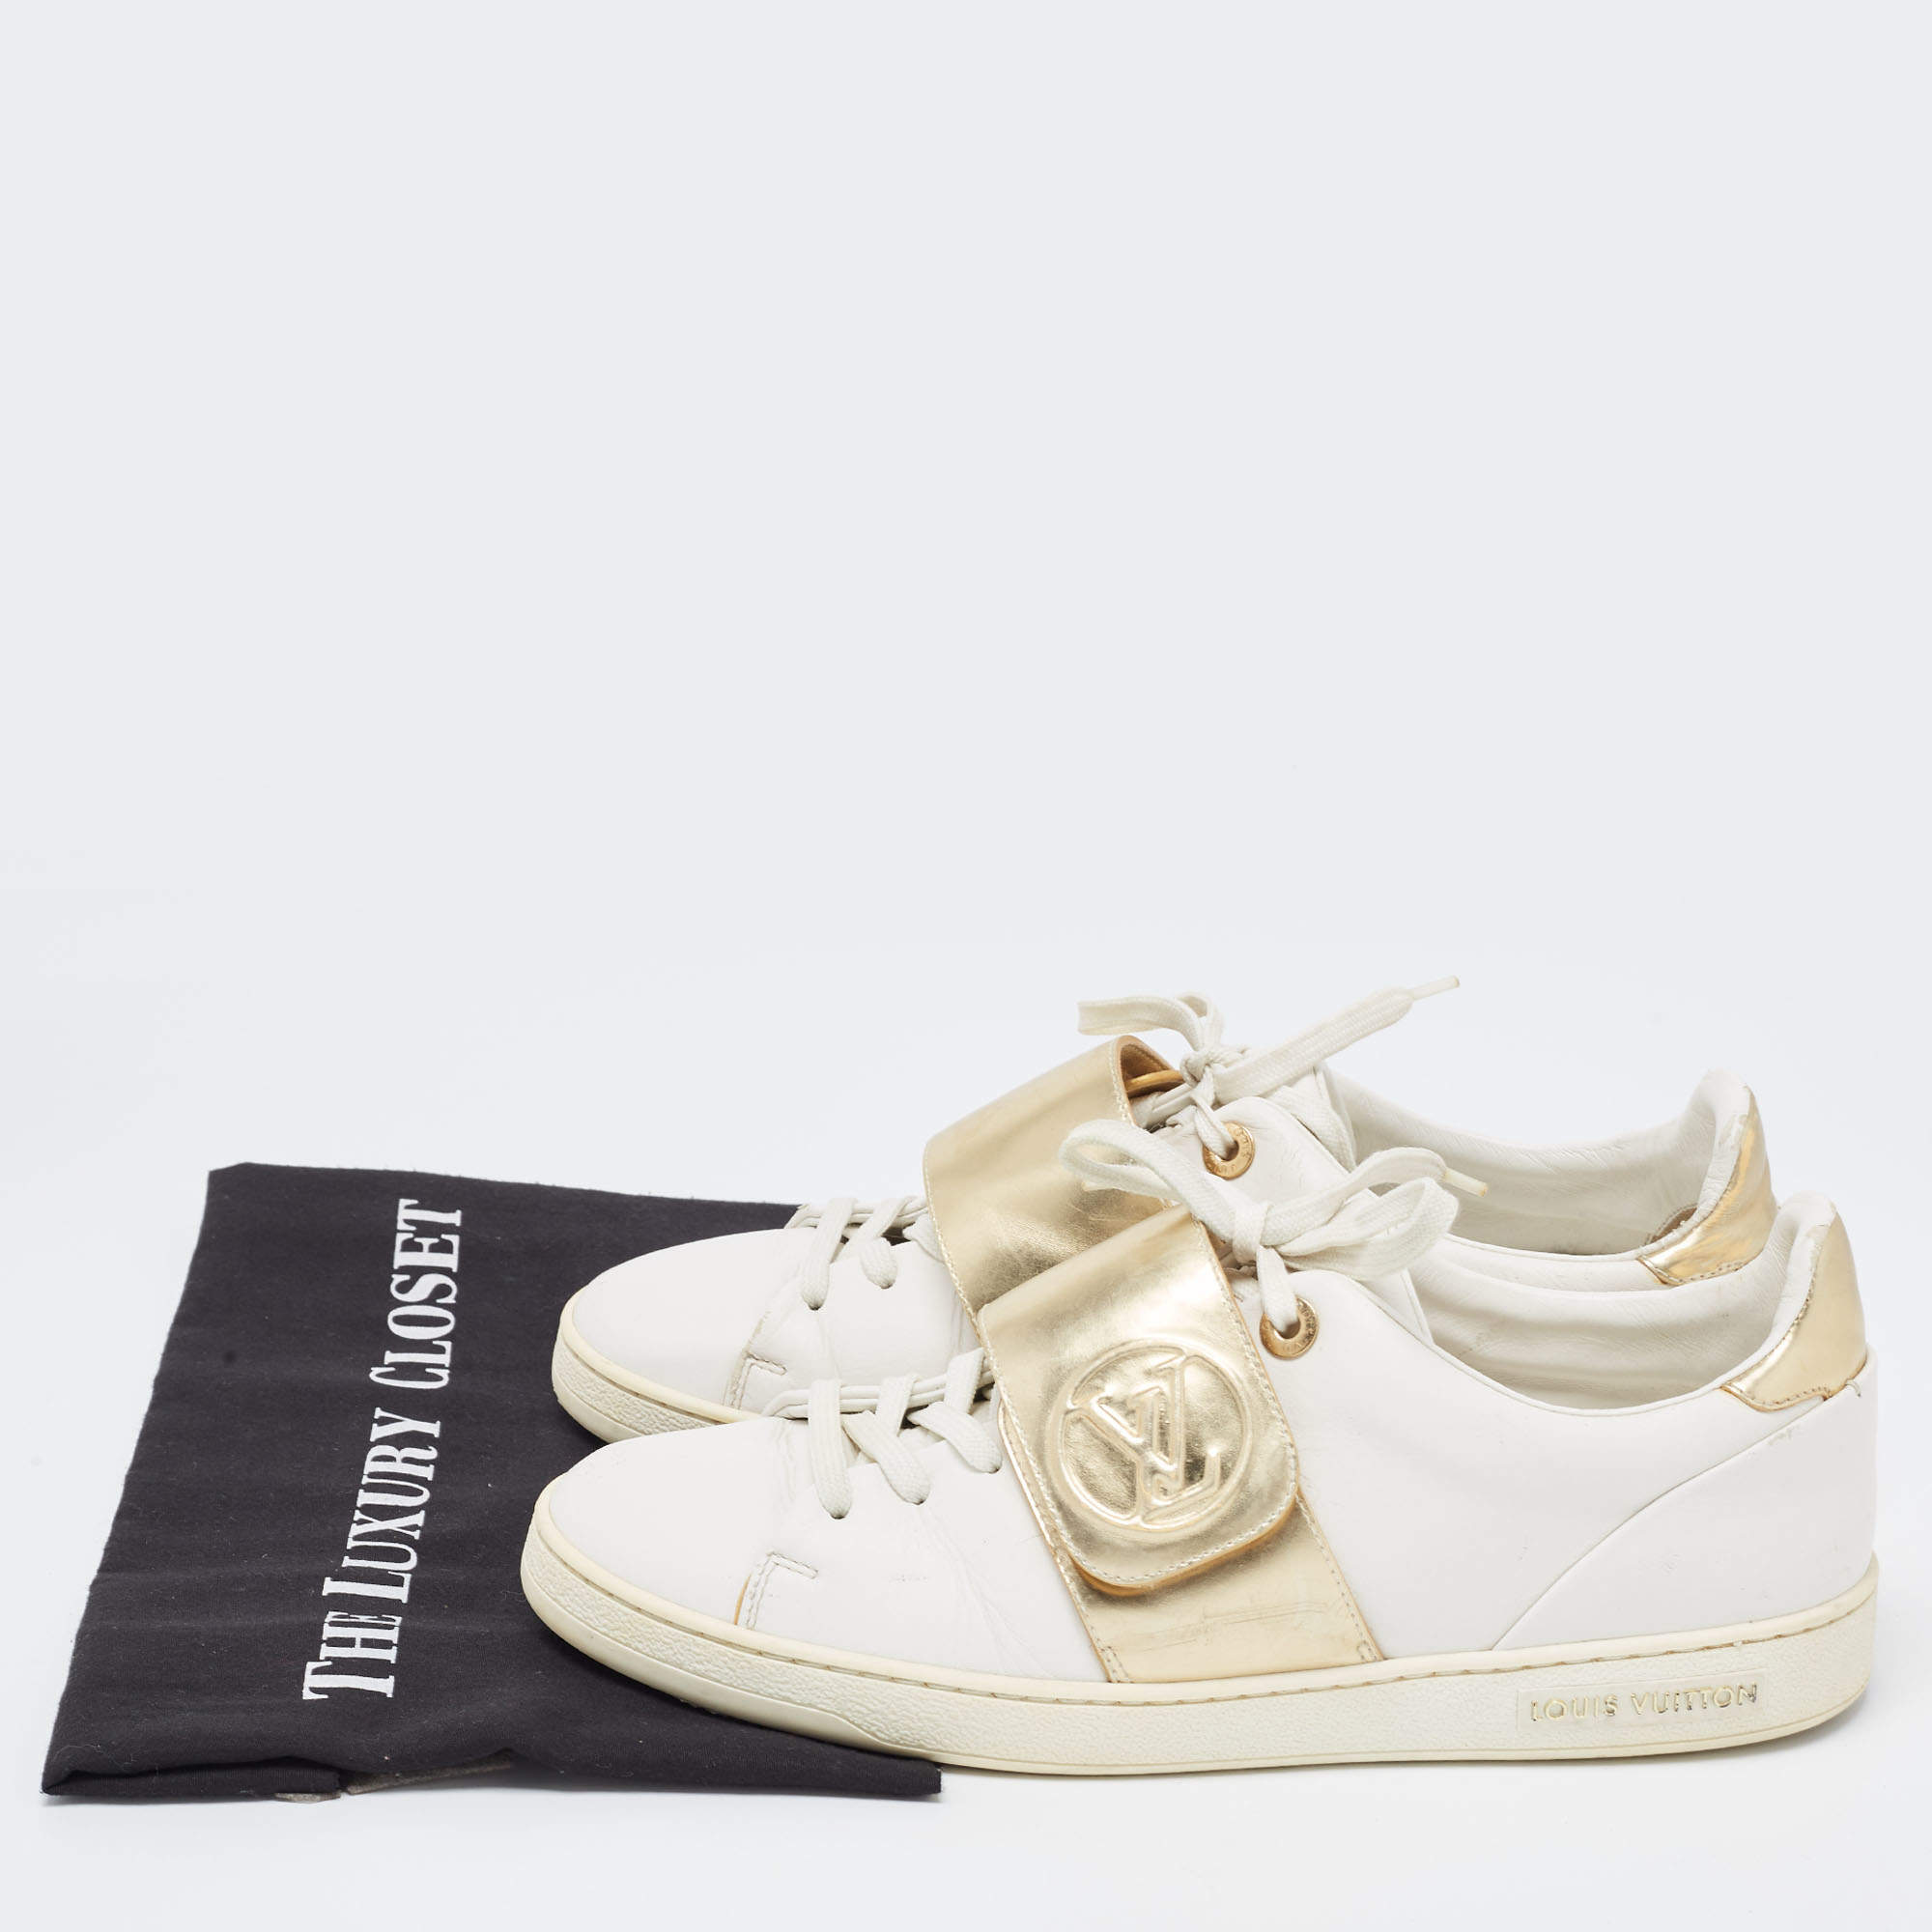 Louis Vuitton White/Gold Leather Frontrow Sneakers Size 41 - ShopStyle